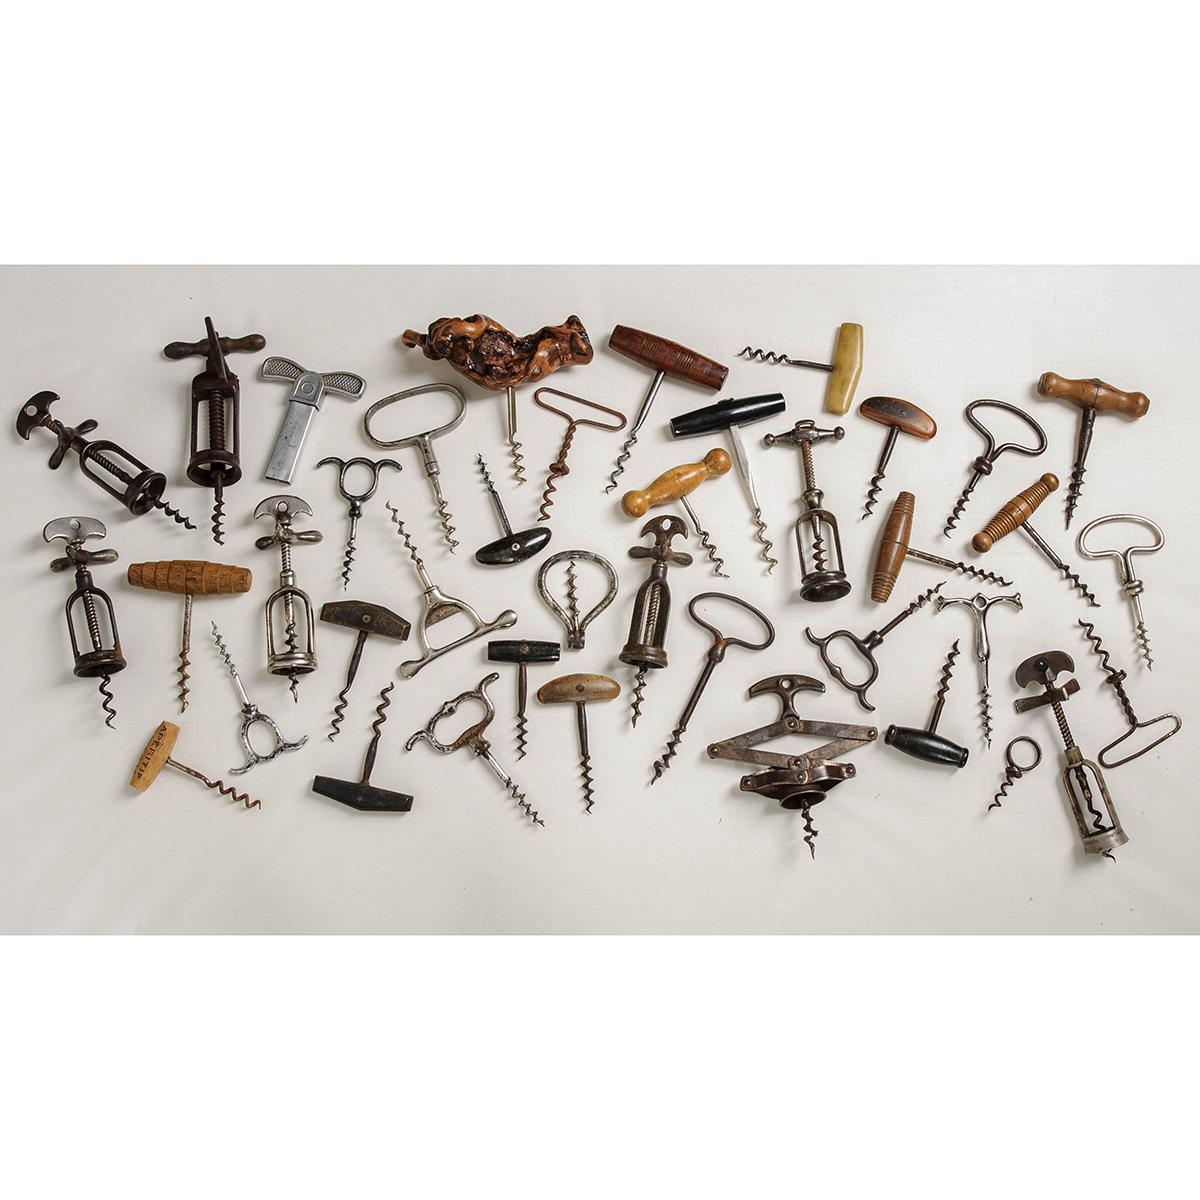 Add charm to your bar or wine cellar with one or all of these vintage corkscrews. Each is unique and could elevate your collection. Prices vary $50 – $150.

Types of Corkscrews in collection: Rack and pinion, direct pull, flynut, concertina